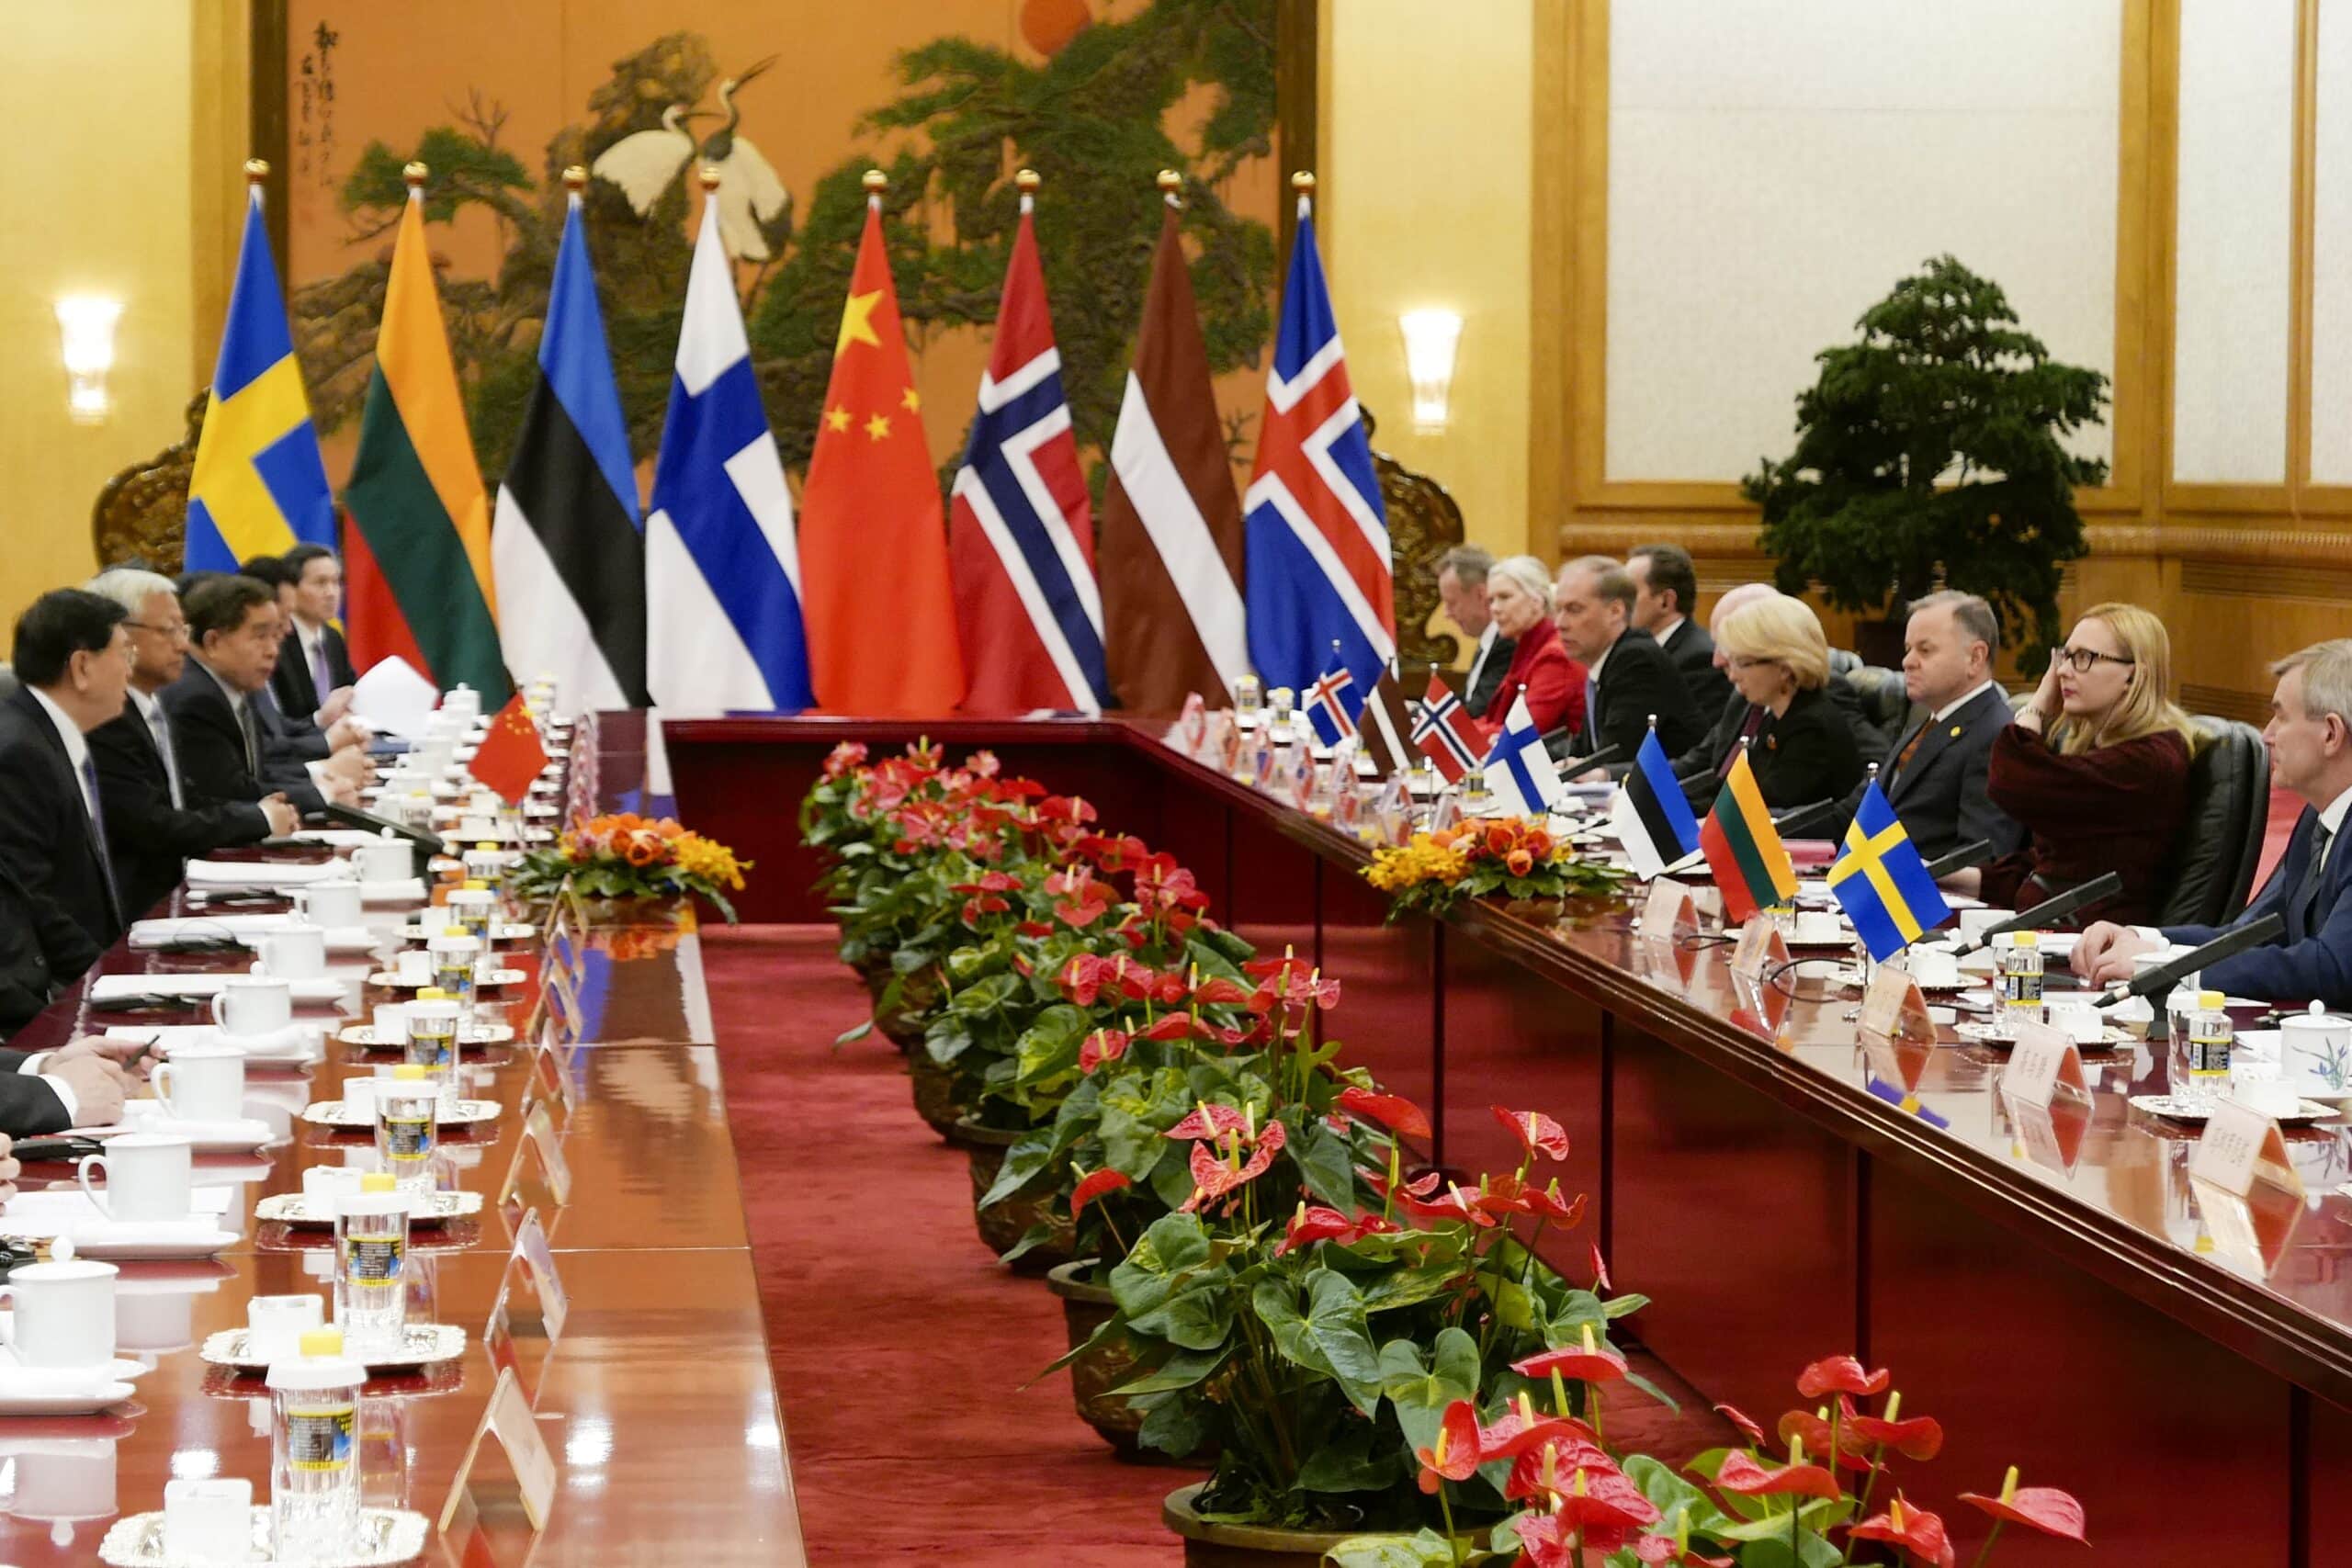 Politicians sitting around long tables facing each other with various flags in the background